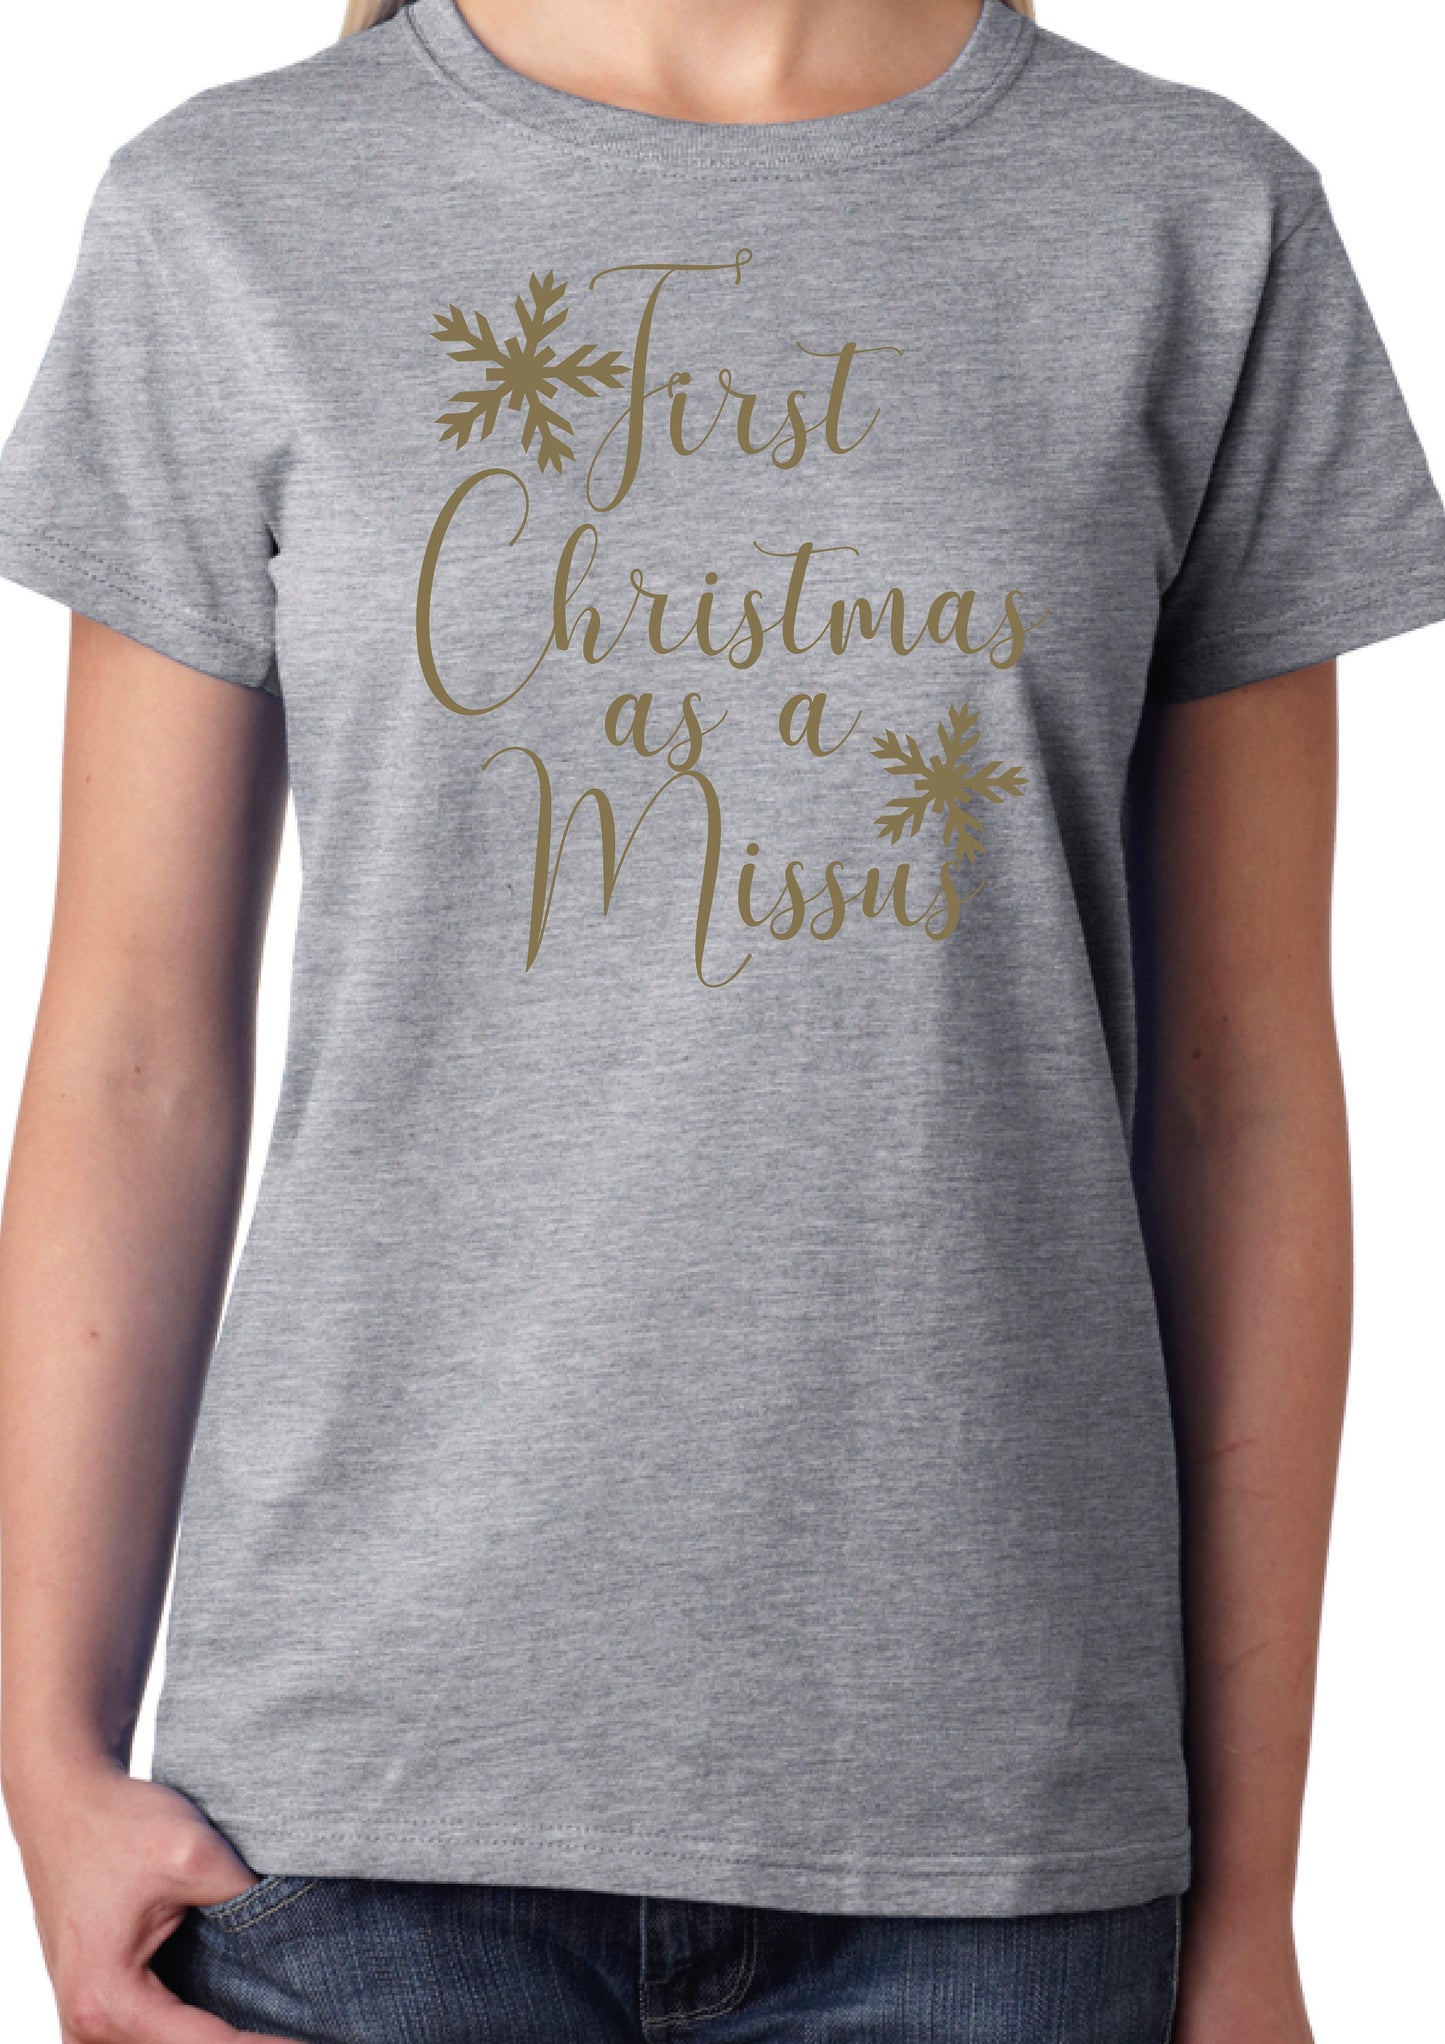 First Christmas as a Missus T-shirt, Funny Xmas Wedding Gift